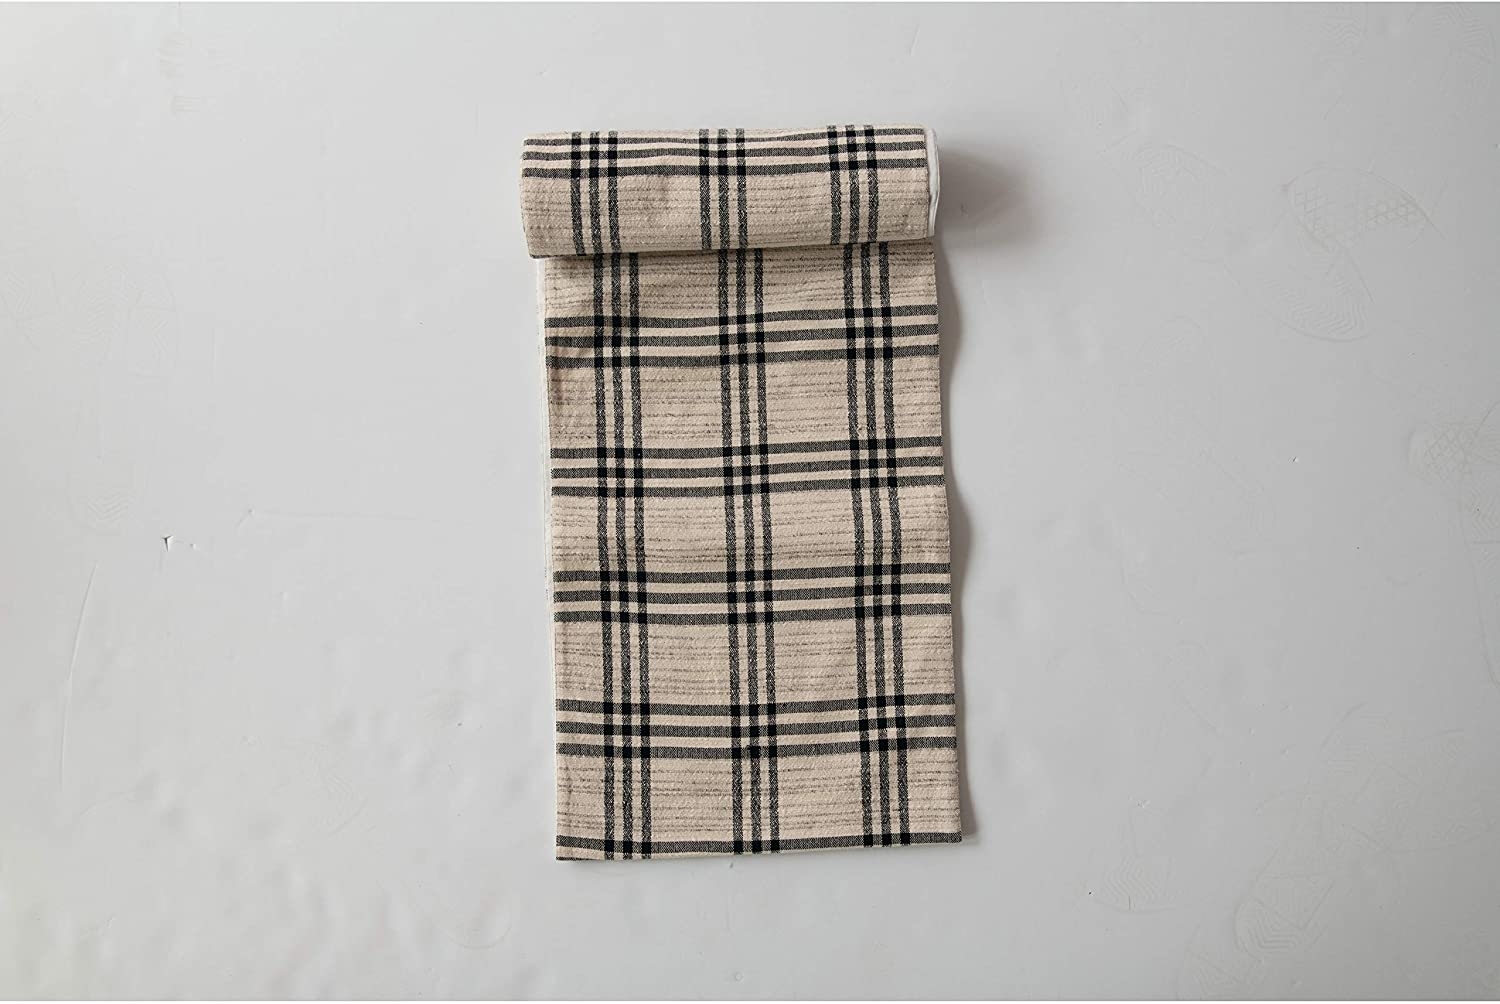 Black Plaid Woven Cotton and Wool Table Runner - Image 5